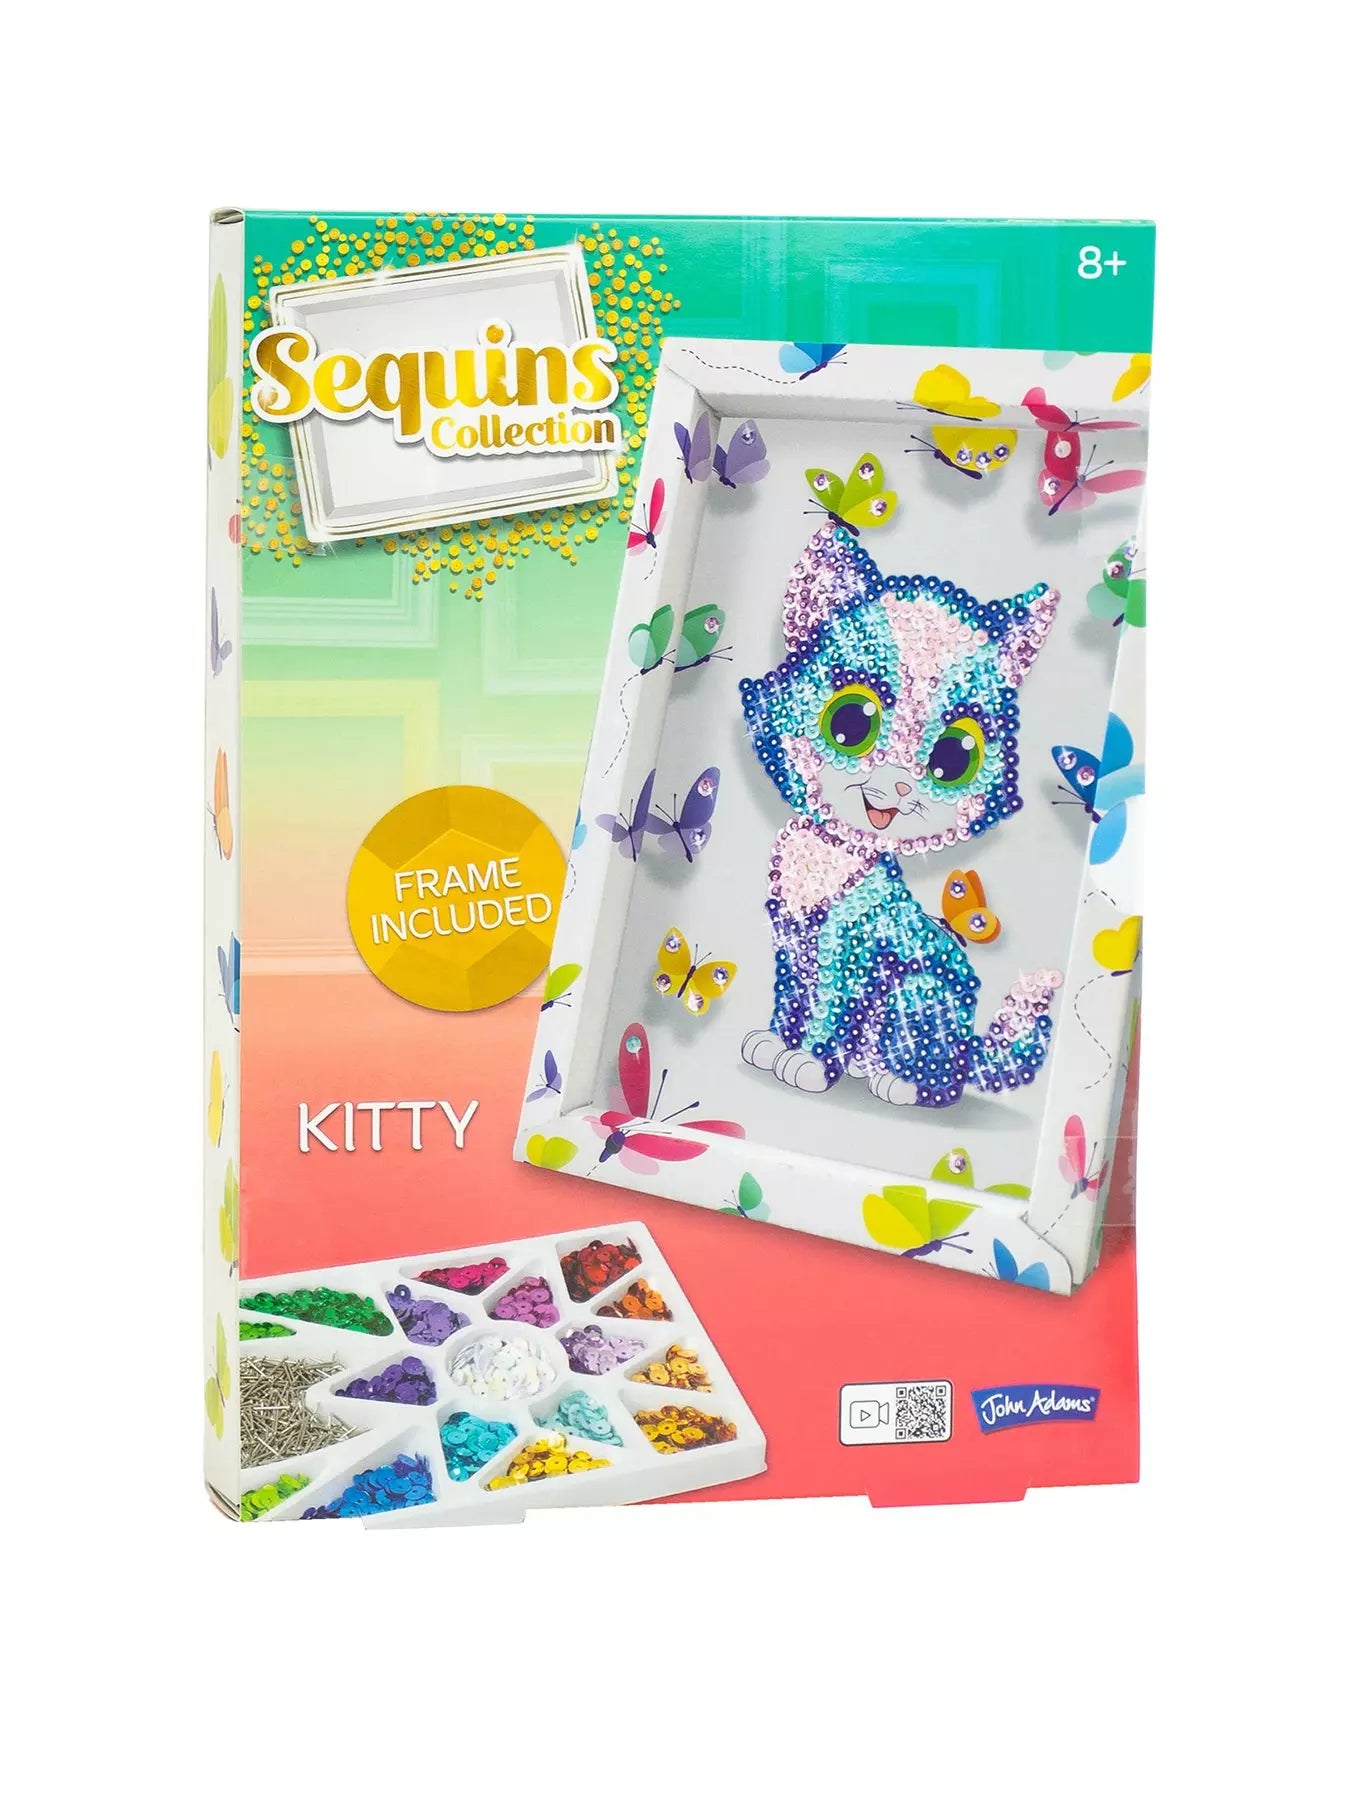 Sequin Collection - Kitty